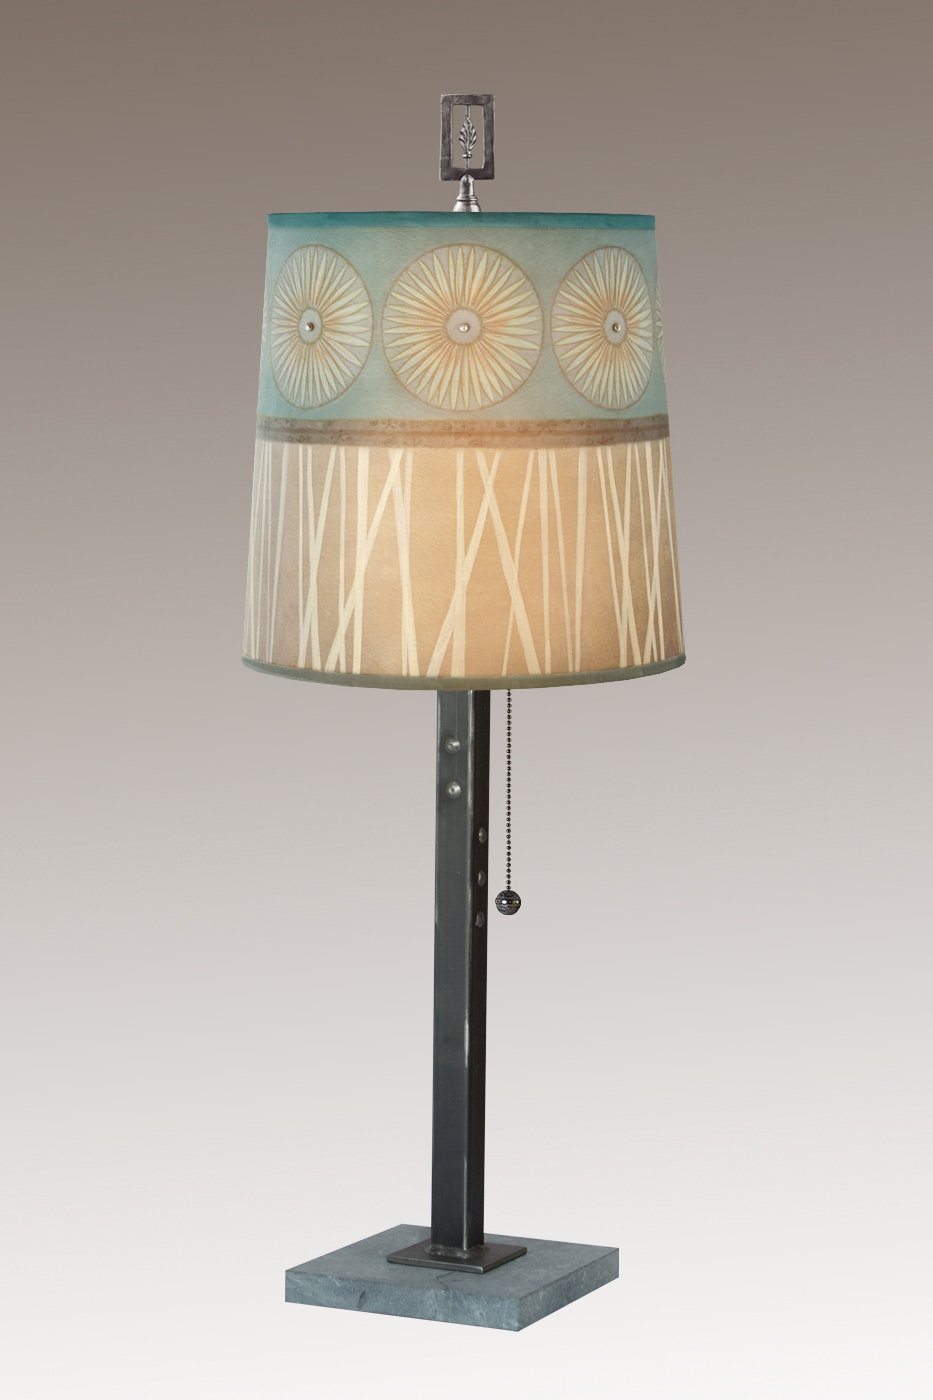 Steel Table Lamp with Small Drum Shade in Pool